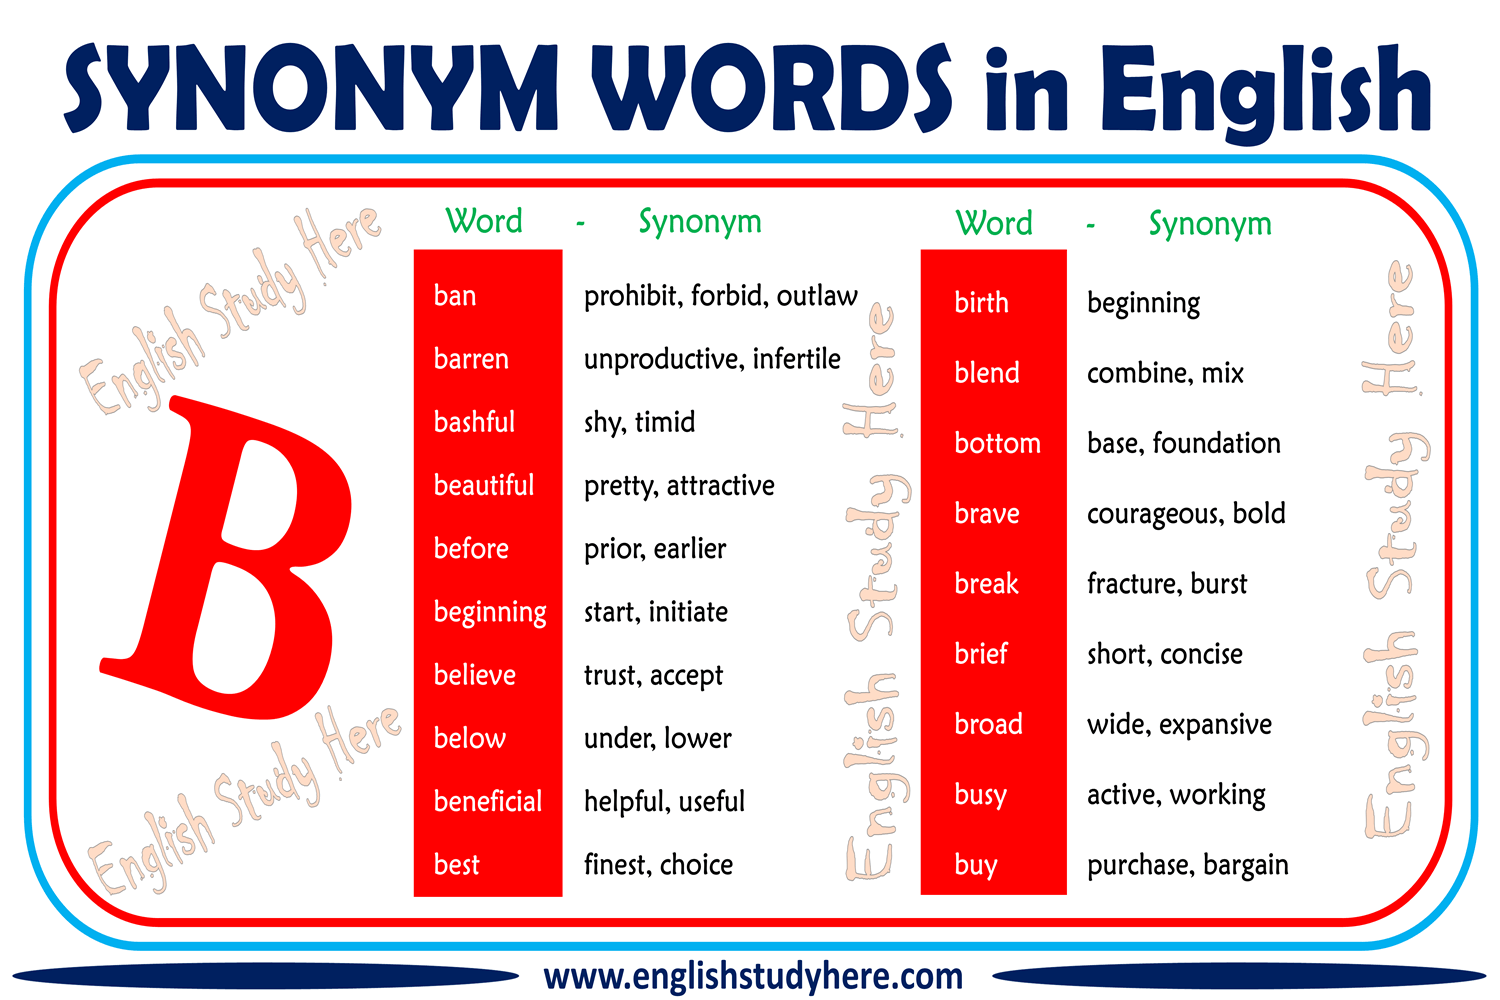 what does the b word mean in english